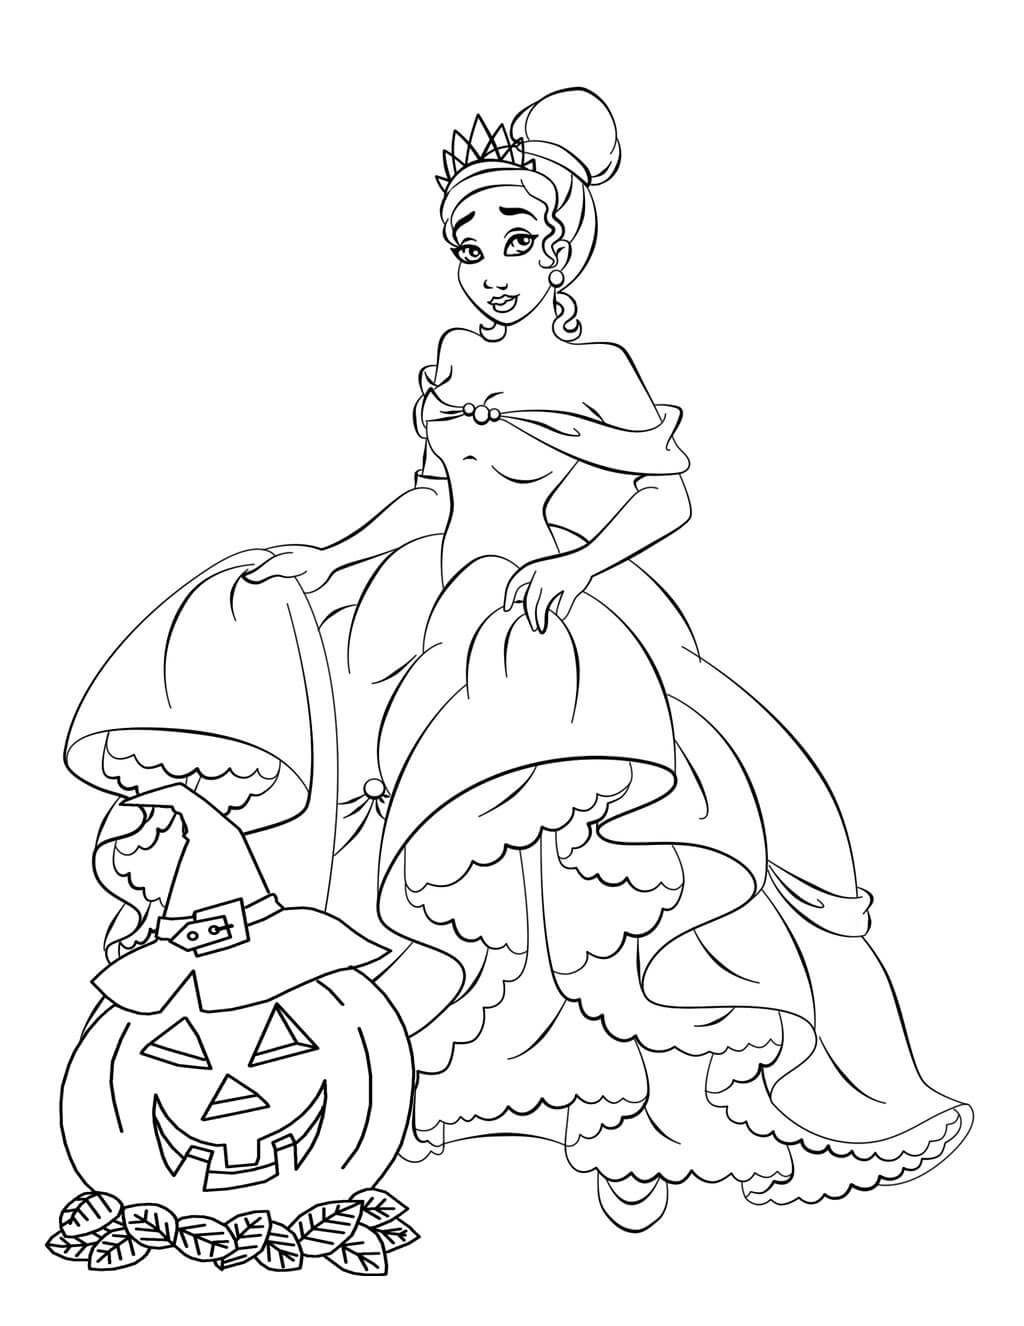 Princess Tia Dressed For Halloween Coloring Page